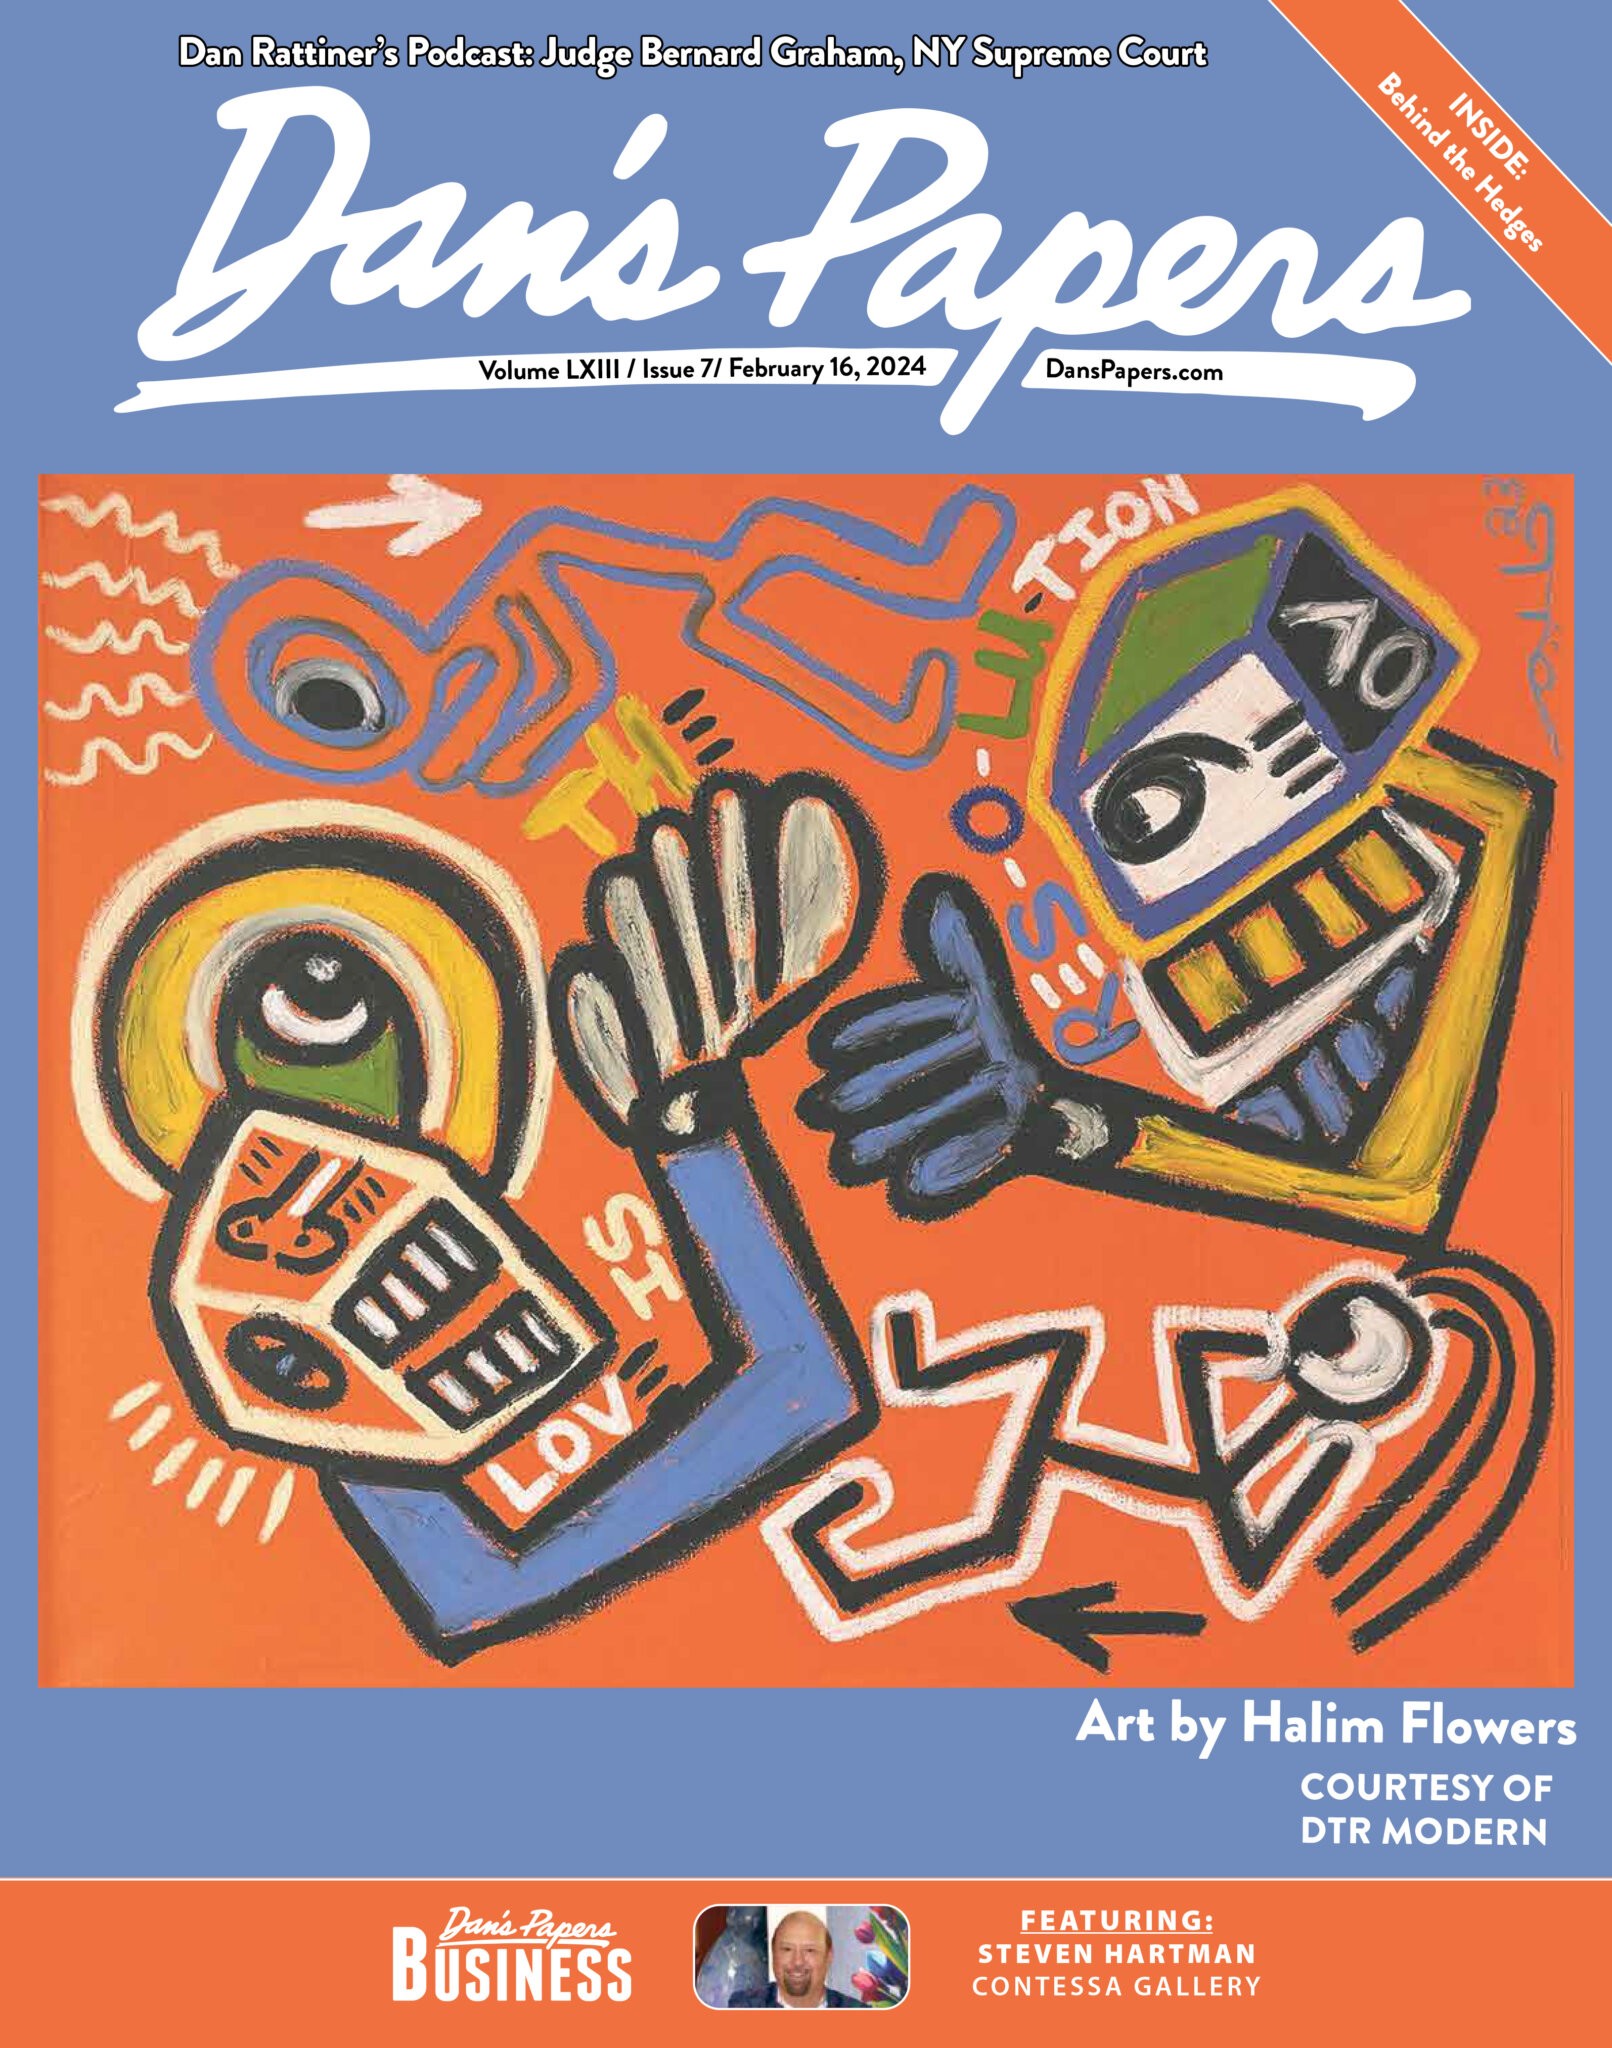 February 16, 2024 Dan's Papers cover art by Halim Flowers, Courtesy DTR Modern Gallery